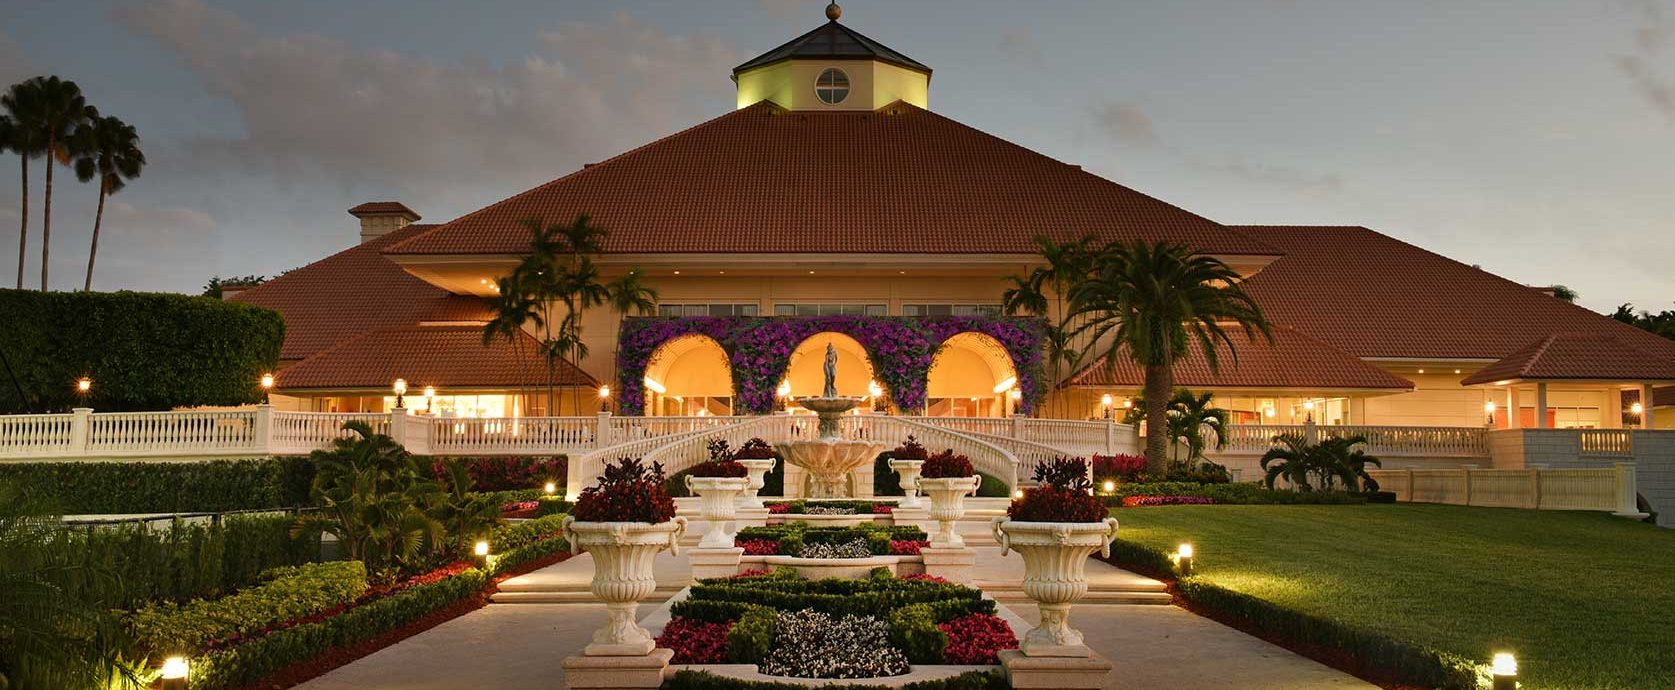 Front view of the Pritikin resort in Miami, Florida lit up at night with garden in the foreground.